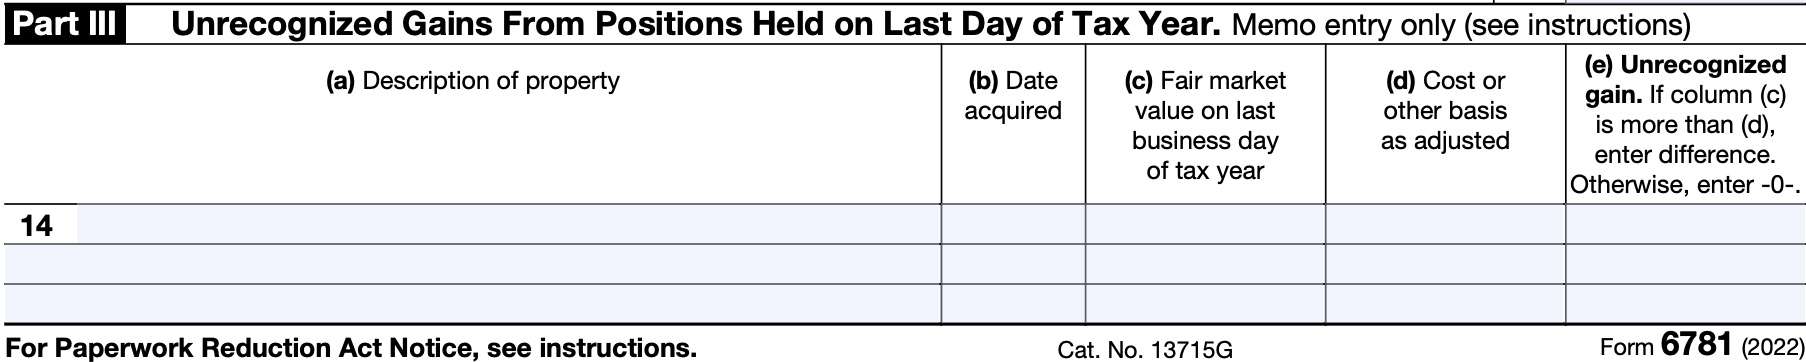 irs form 6781, part III, unrecognized gains from positions held on last day of tax year